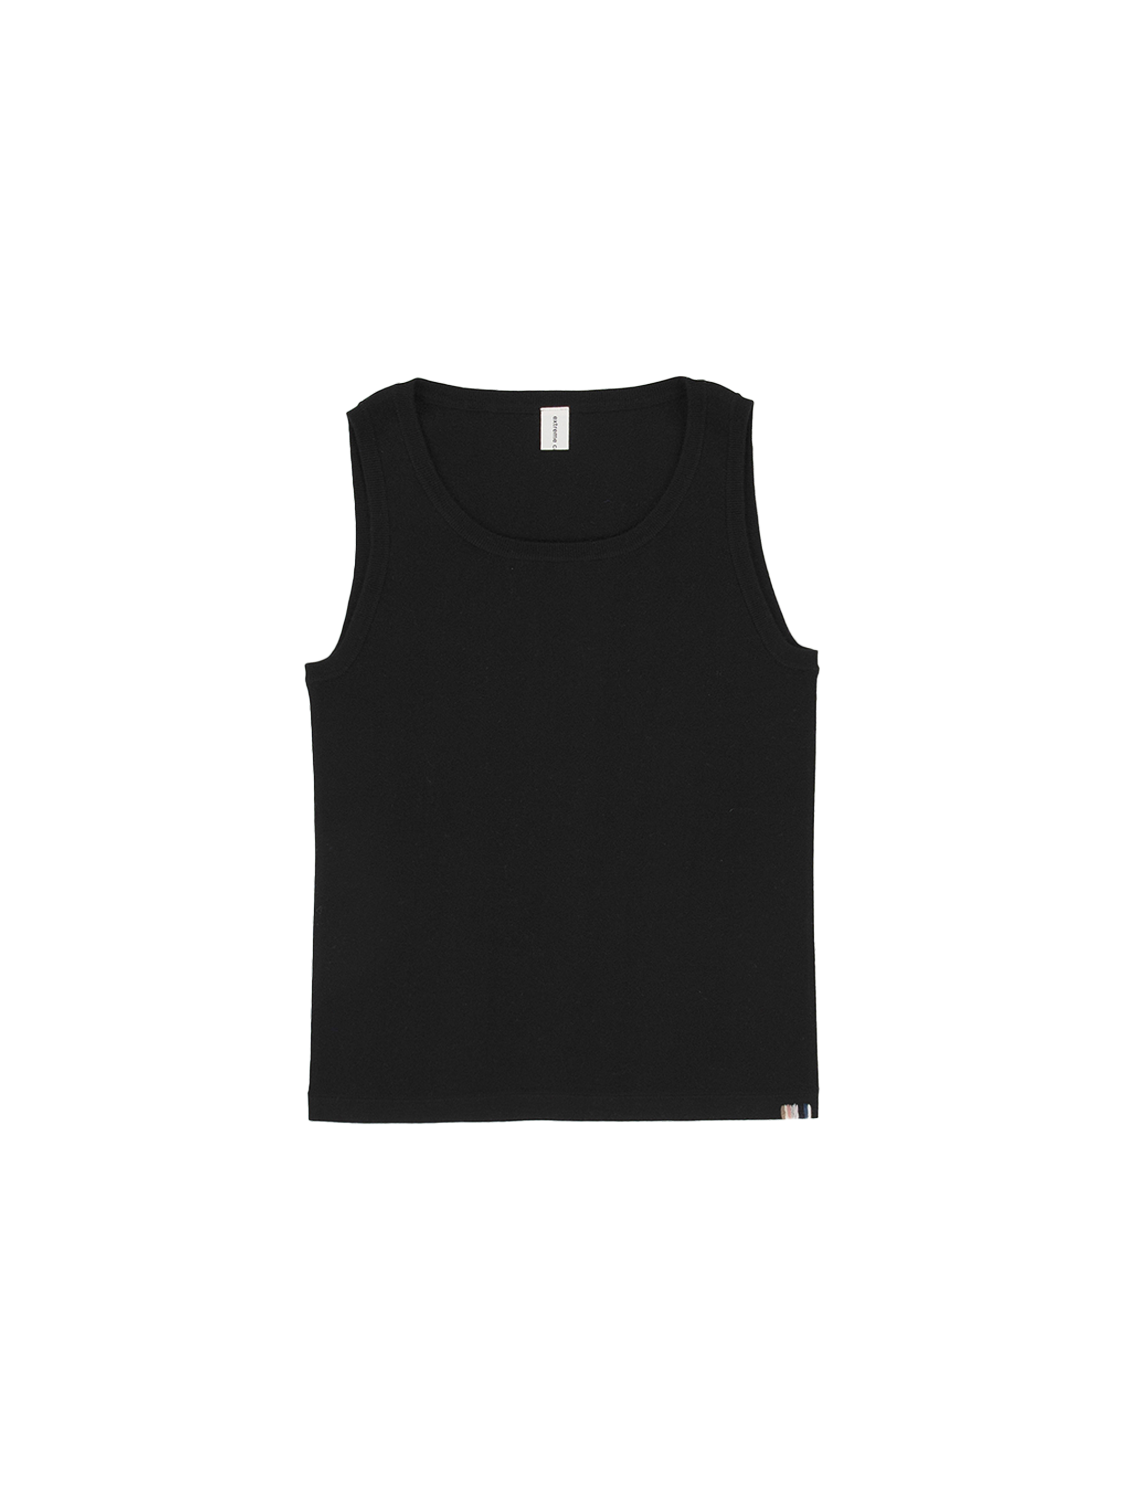 N°333 Singlet – top made from a cotton-cashmere mix 